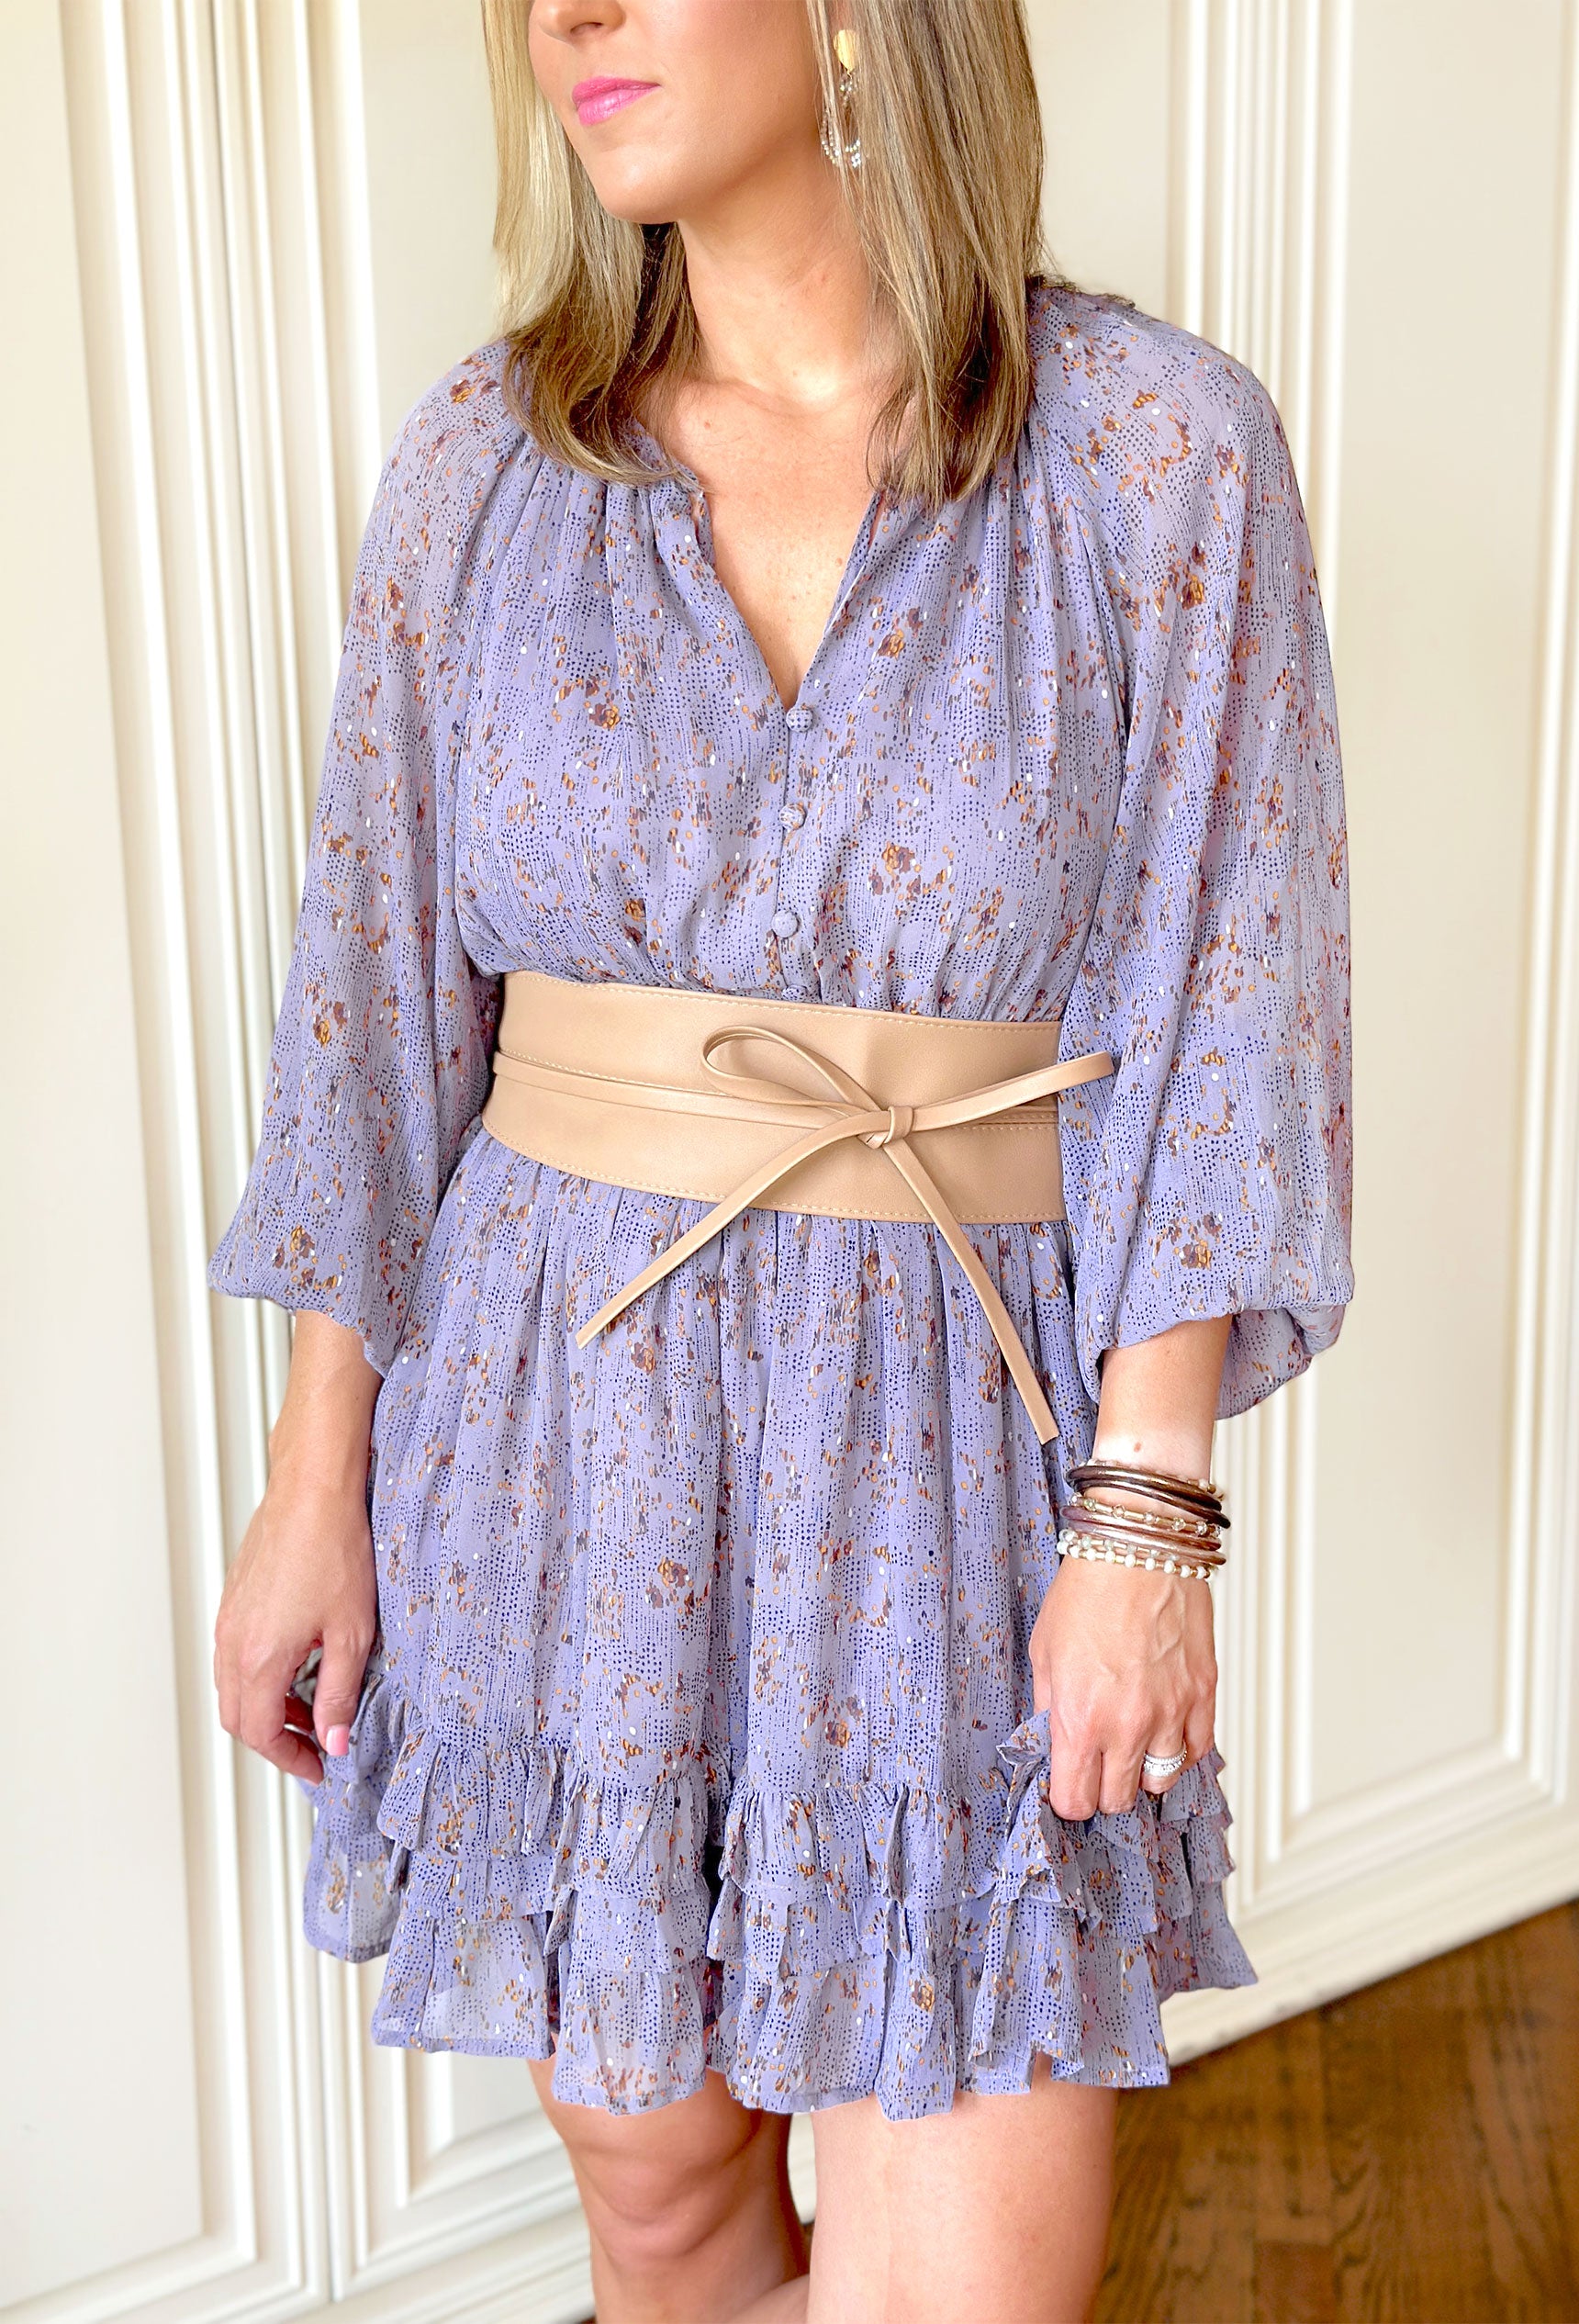 Over The Moon Dress, lilac long sleeve dress with taupe and brown detailing. V-neck with button detailings down the front